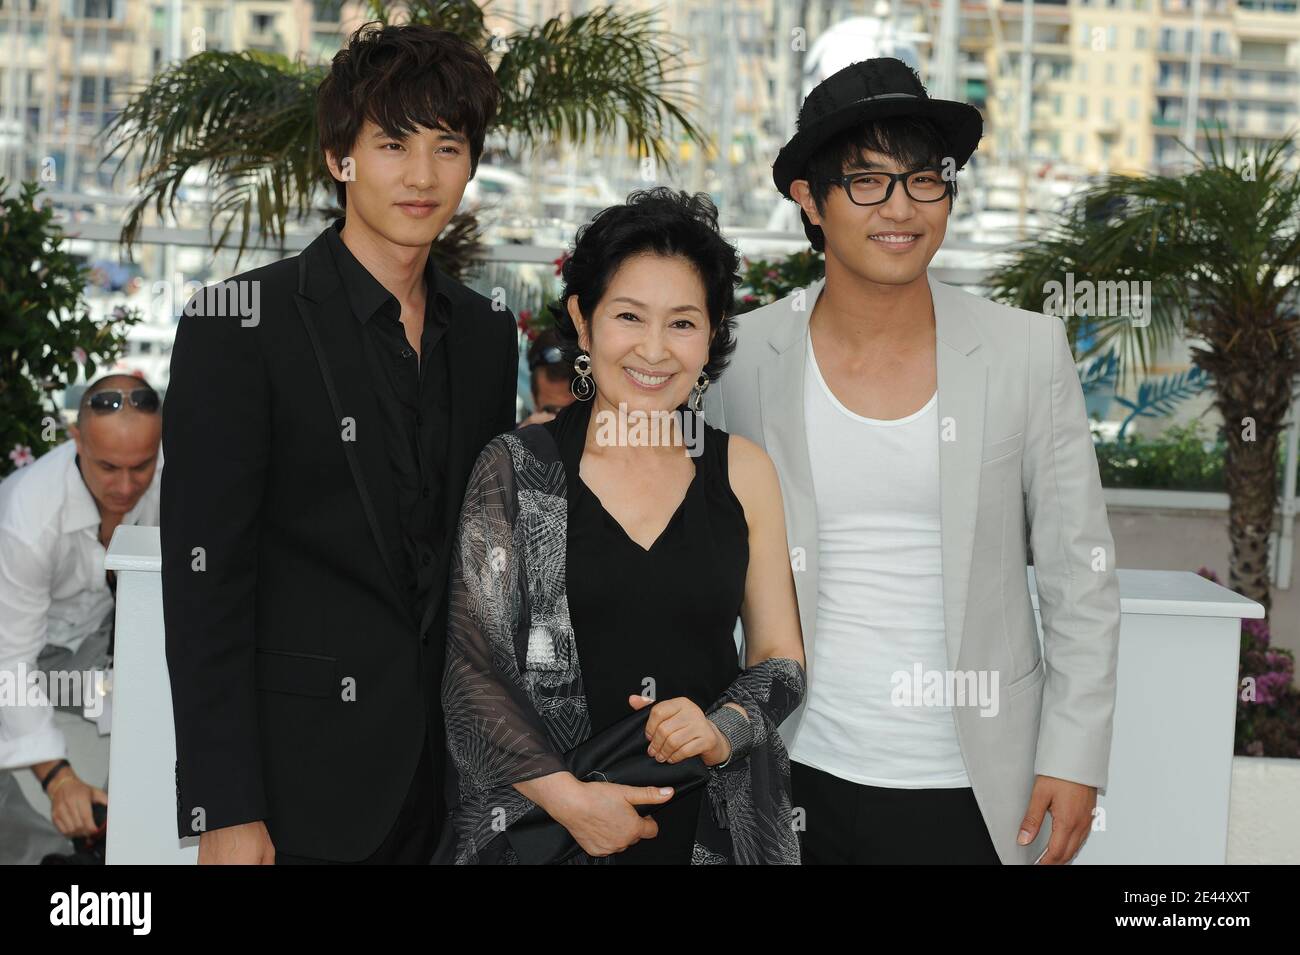 Actor Won Bin with Actress Kim Hye Ja and Actor Jin Goo attend the 'Mother' Photocall held at the Palais Des Festival during the 62nd International Cannes Film Festival in Cannes, France on May 16, 2009. Photo by Nebinger-Orban/ABACAPRESS.COM Stock Photo